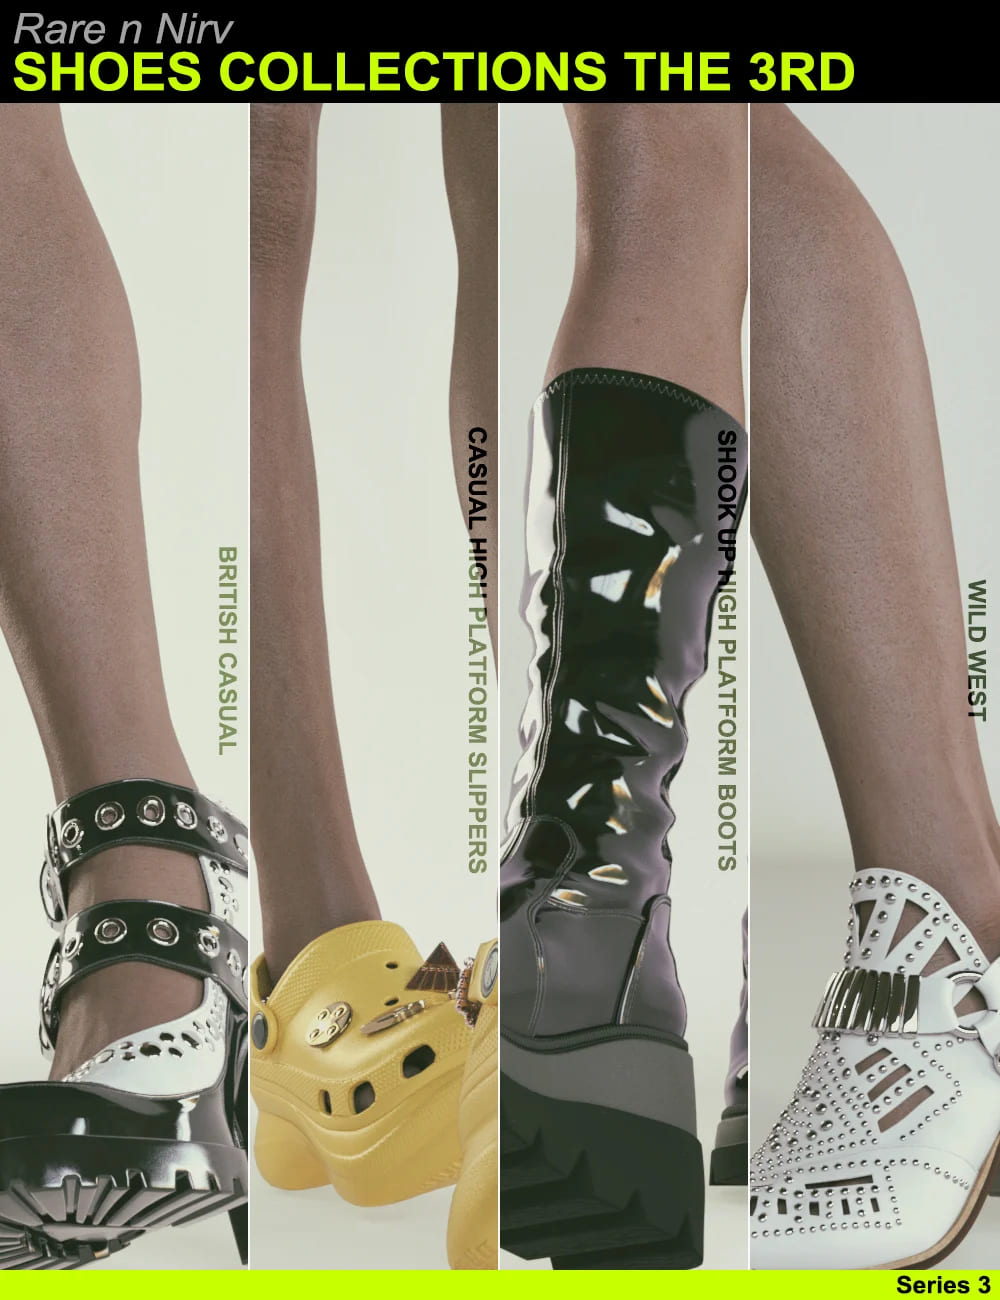 Rare n Nirv Shoes Collections the 3rd_DAZ3DDL